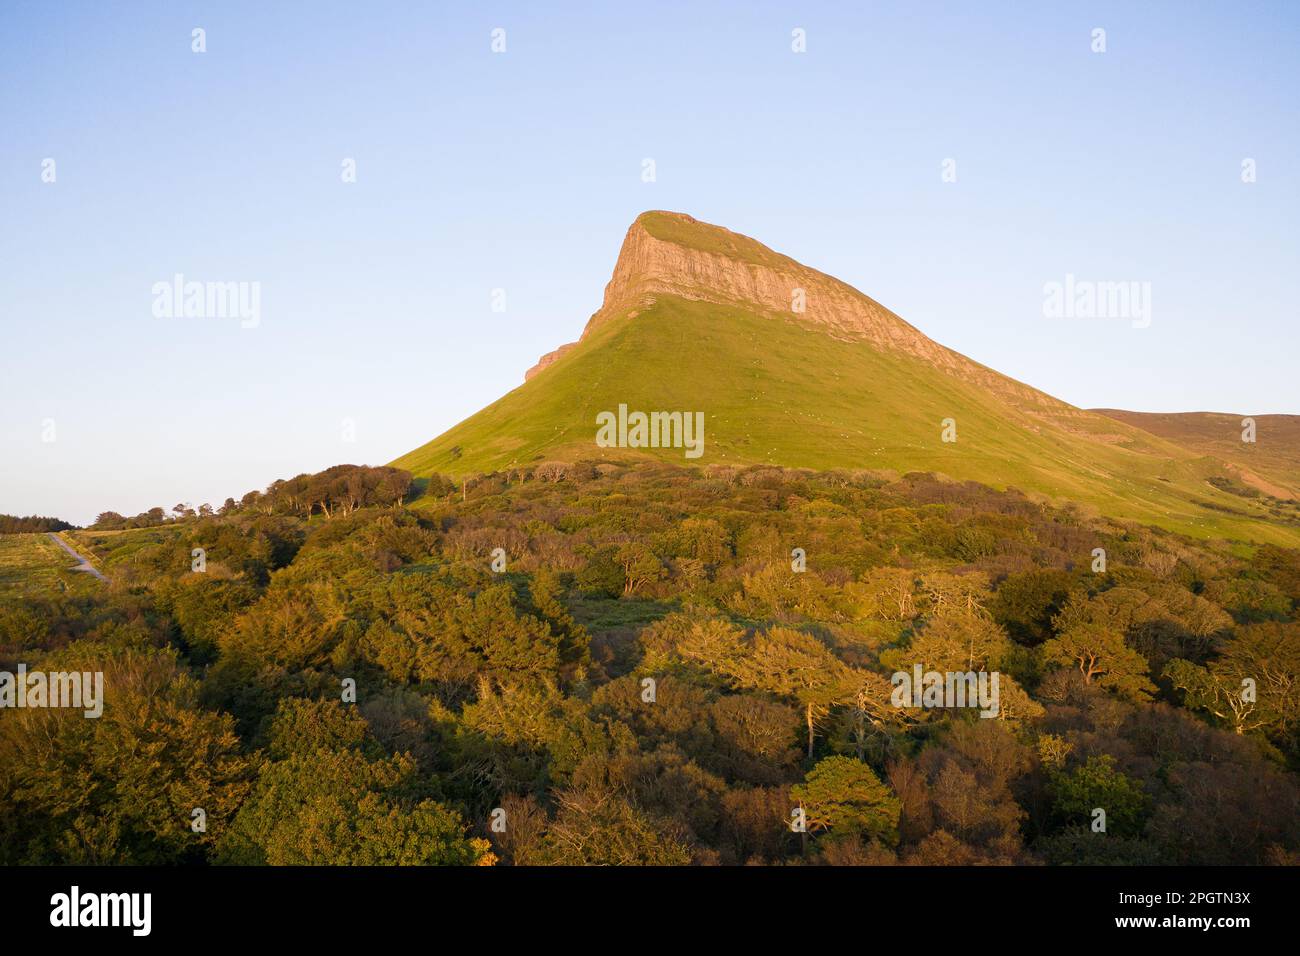 County Sligo / Ireland : Aerial view of Benbulbin or Benbulben a large flat-topped rock formation, part of Dartry Mountains Stock Photo